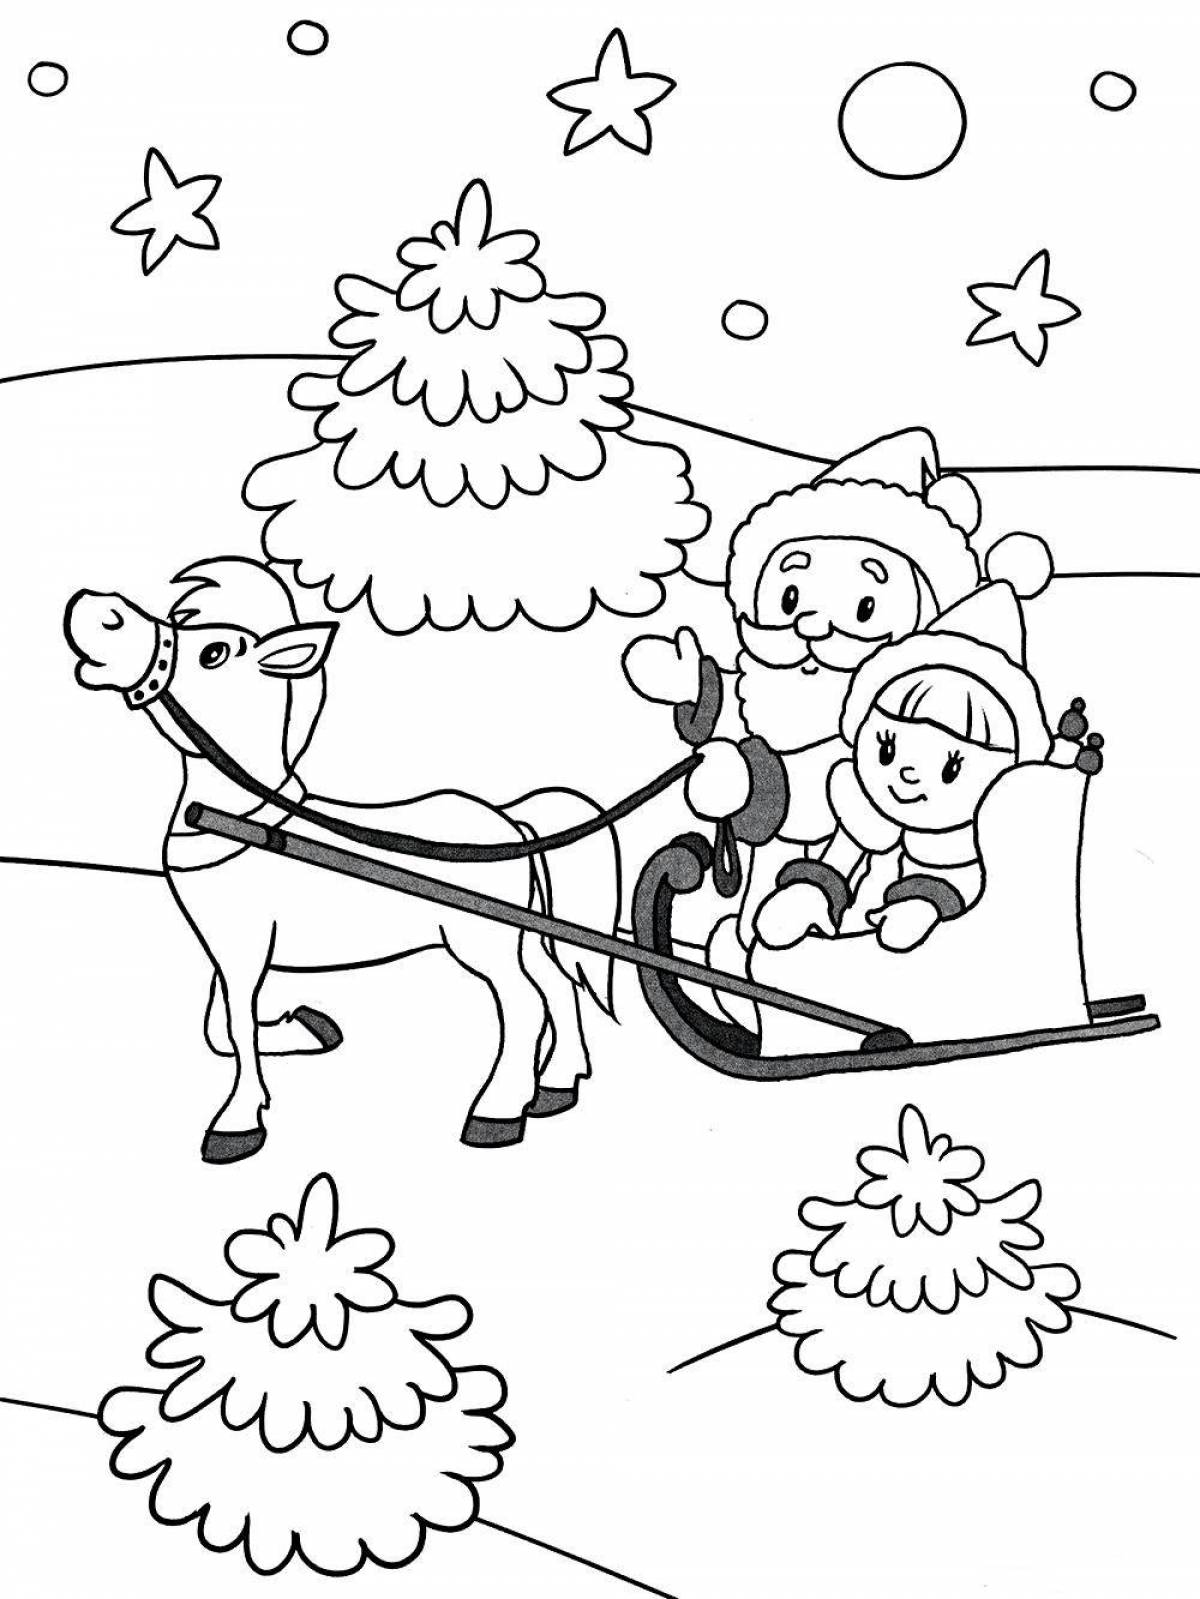 Holiday winter coloring book for children 5-6 years old